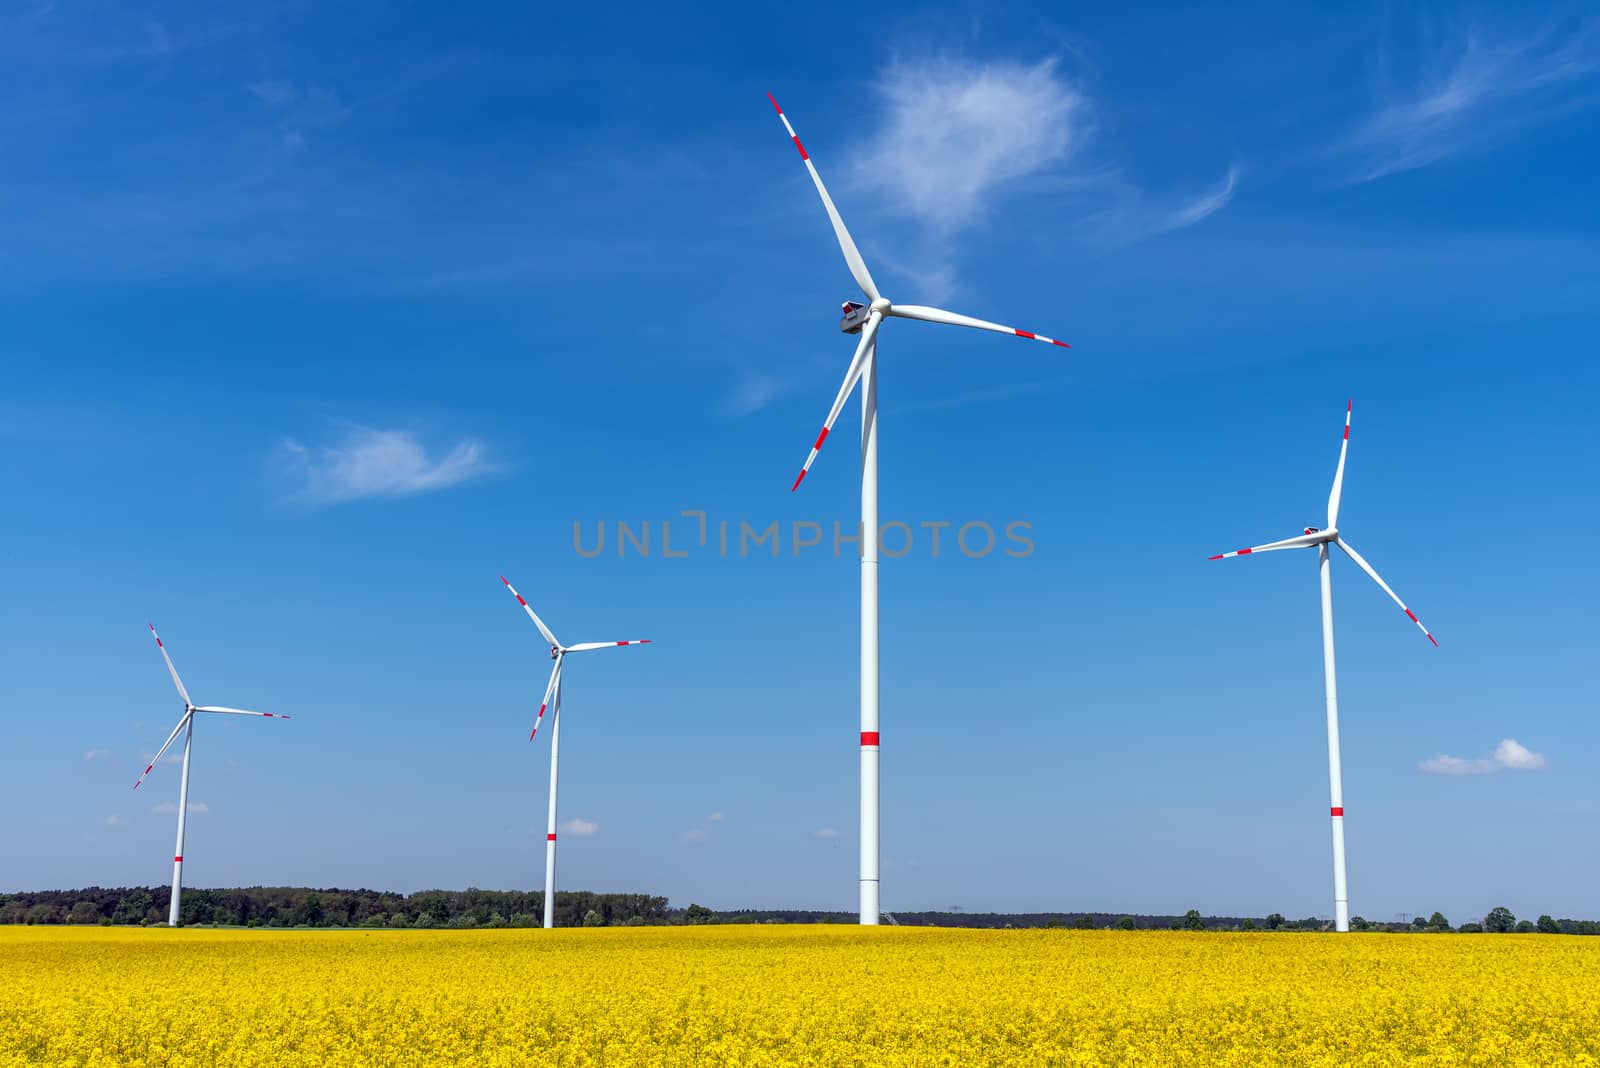 Wind energy turbines and a flowering canola field seen in Germany